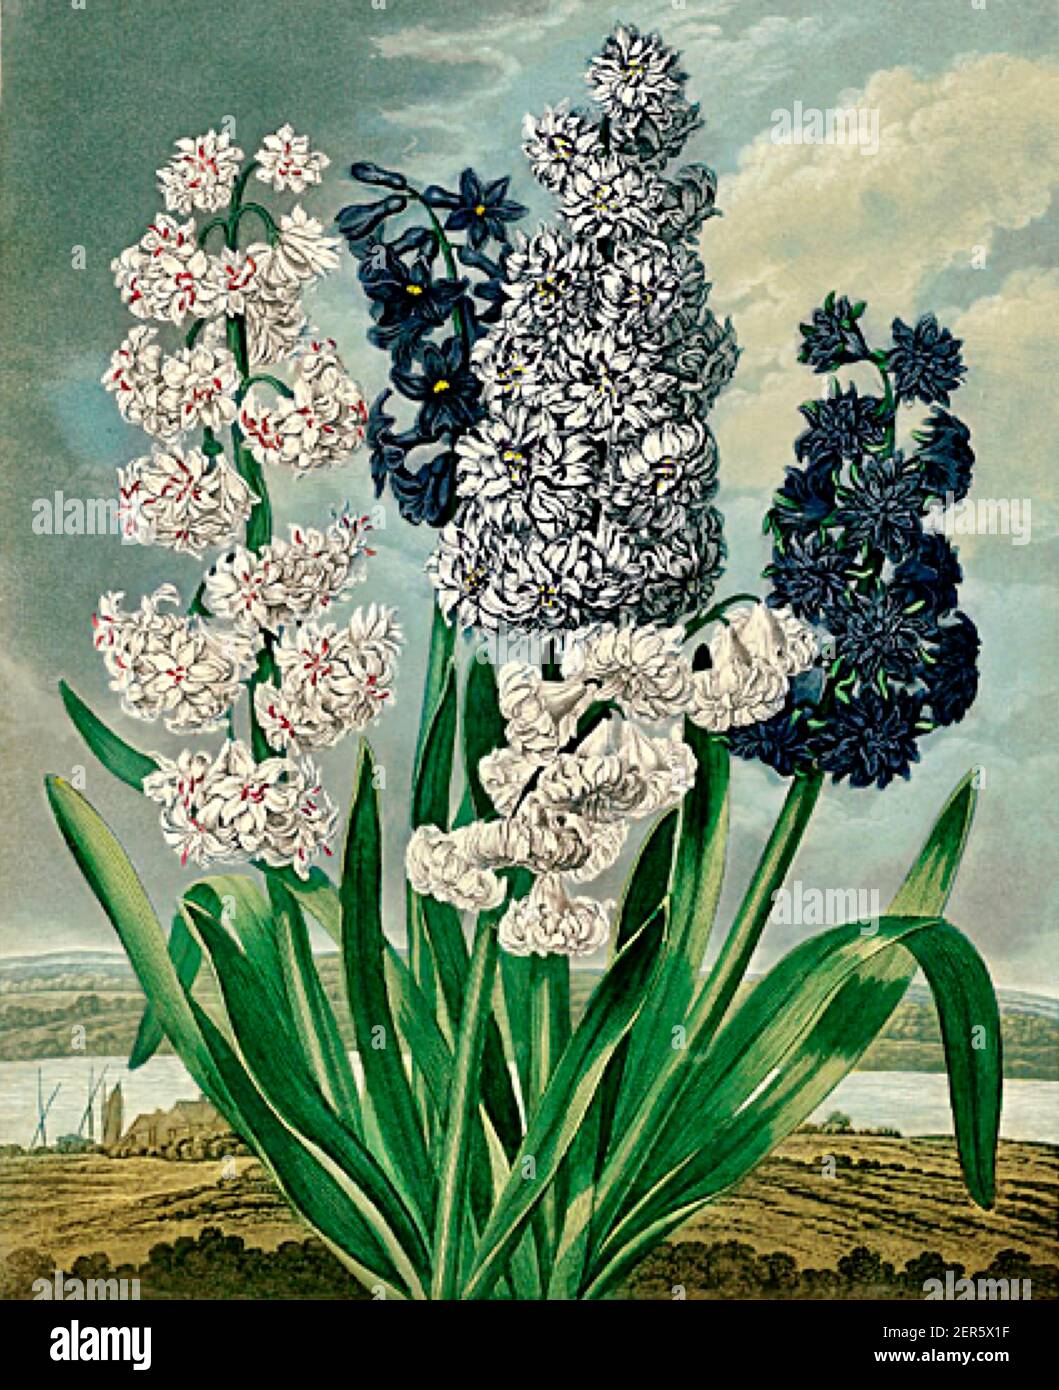 Thomas Warner artwork called Hyacinths from The Temple of Flora by Robert John Thornton. Stock Photo